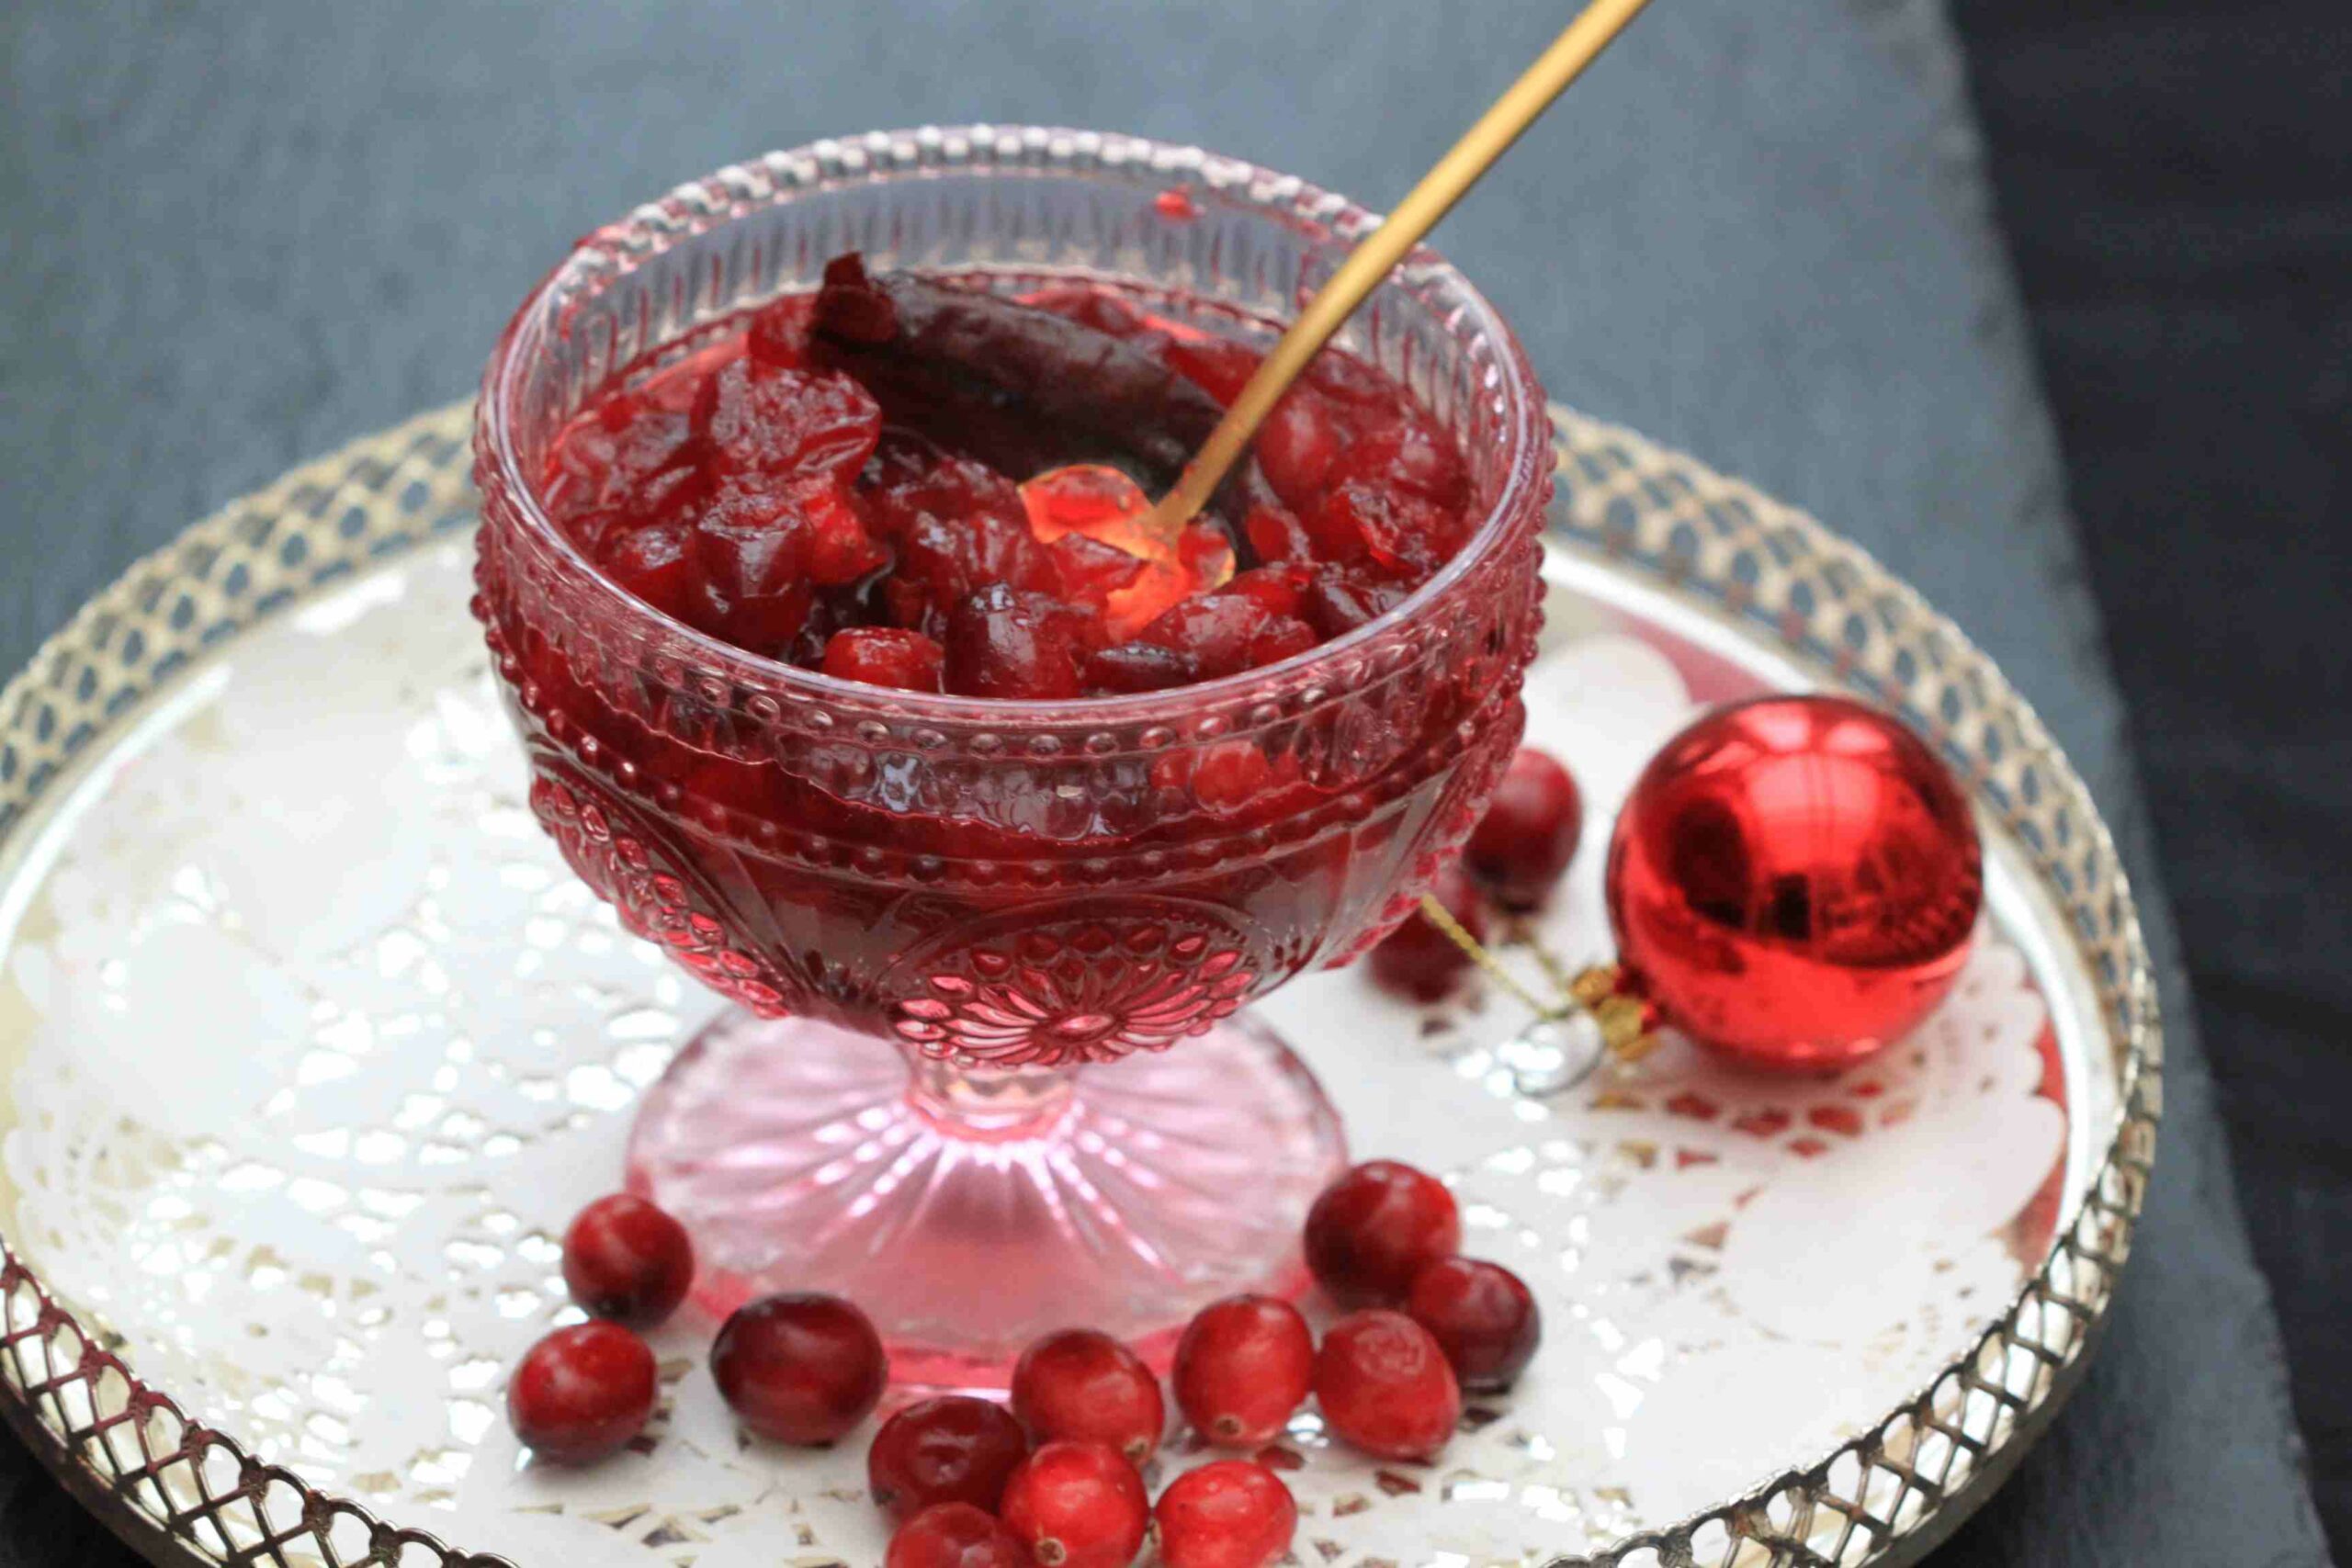 The cranberry chutney is a great add at the traditional Christmas lunch